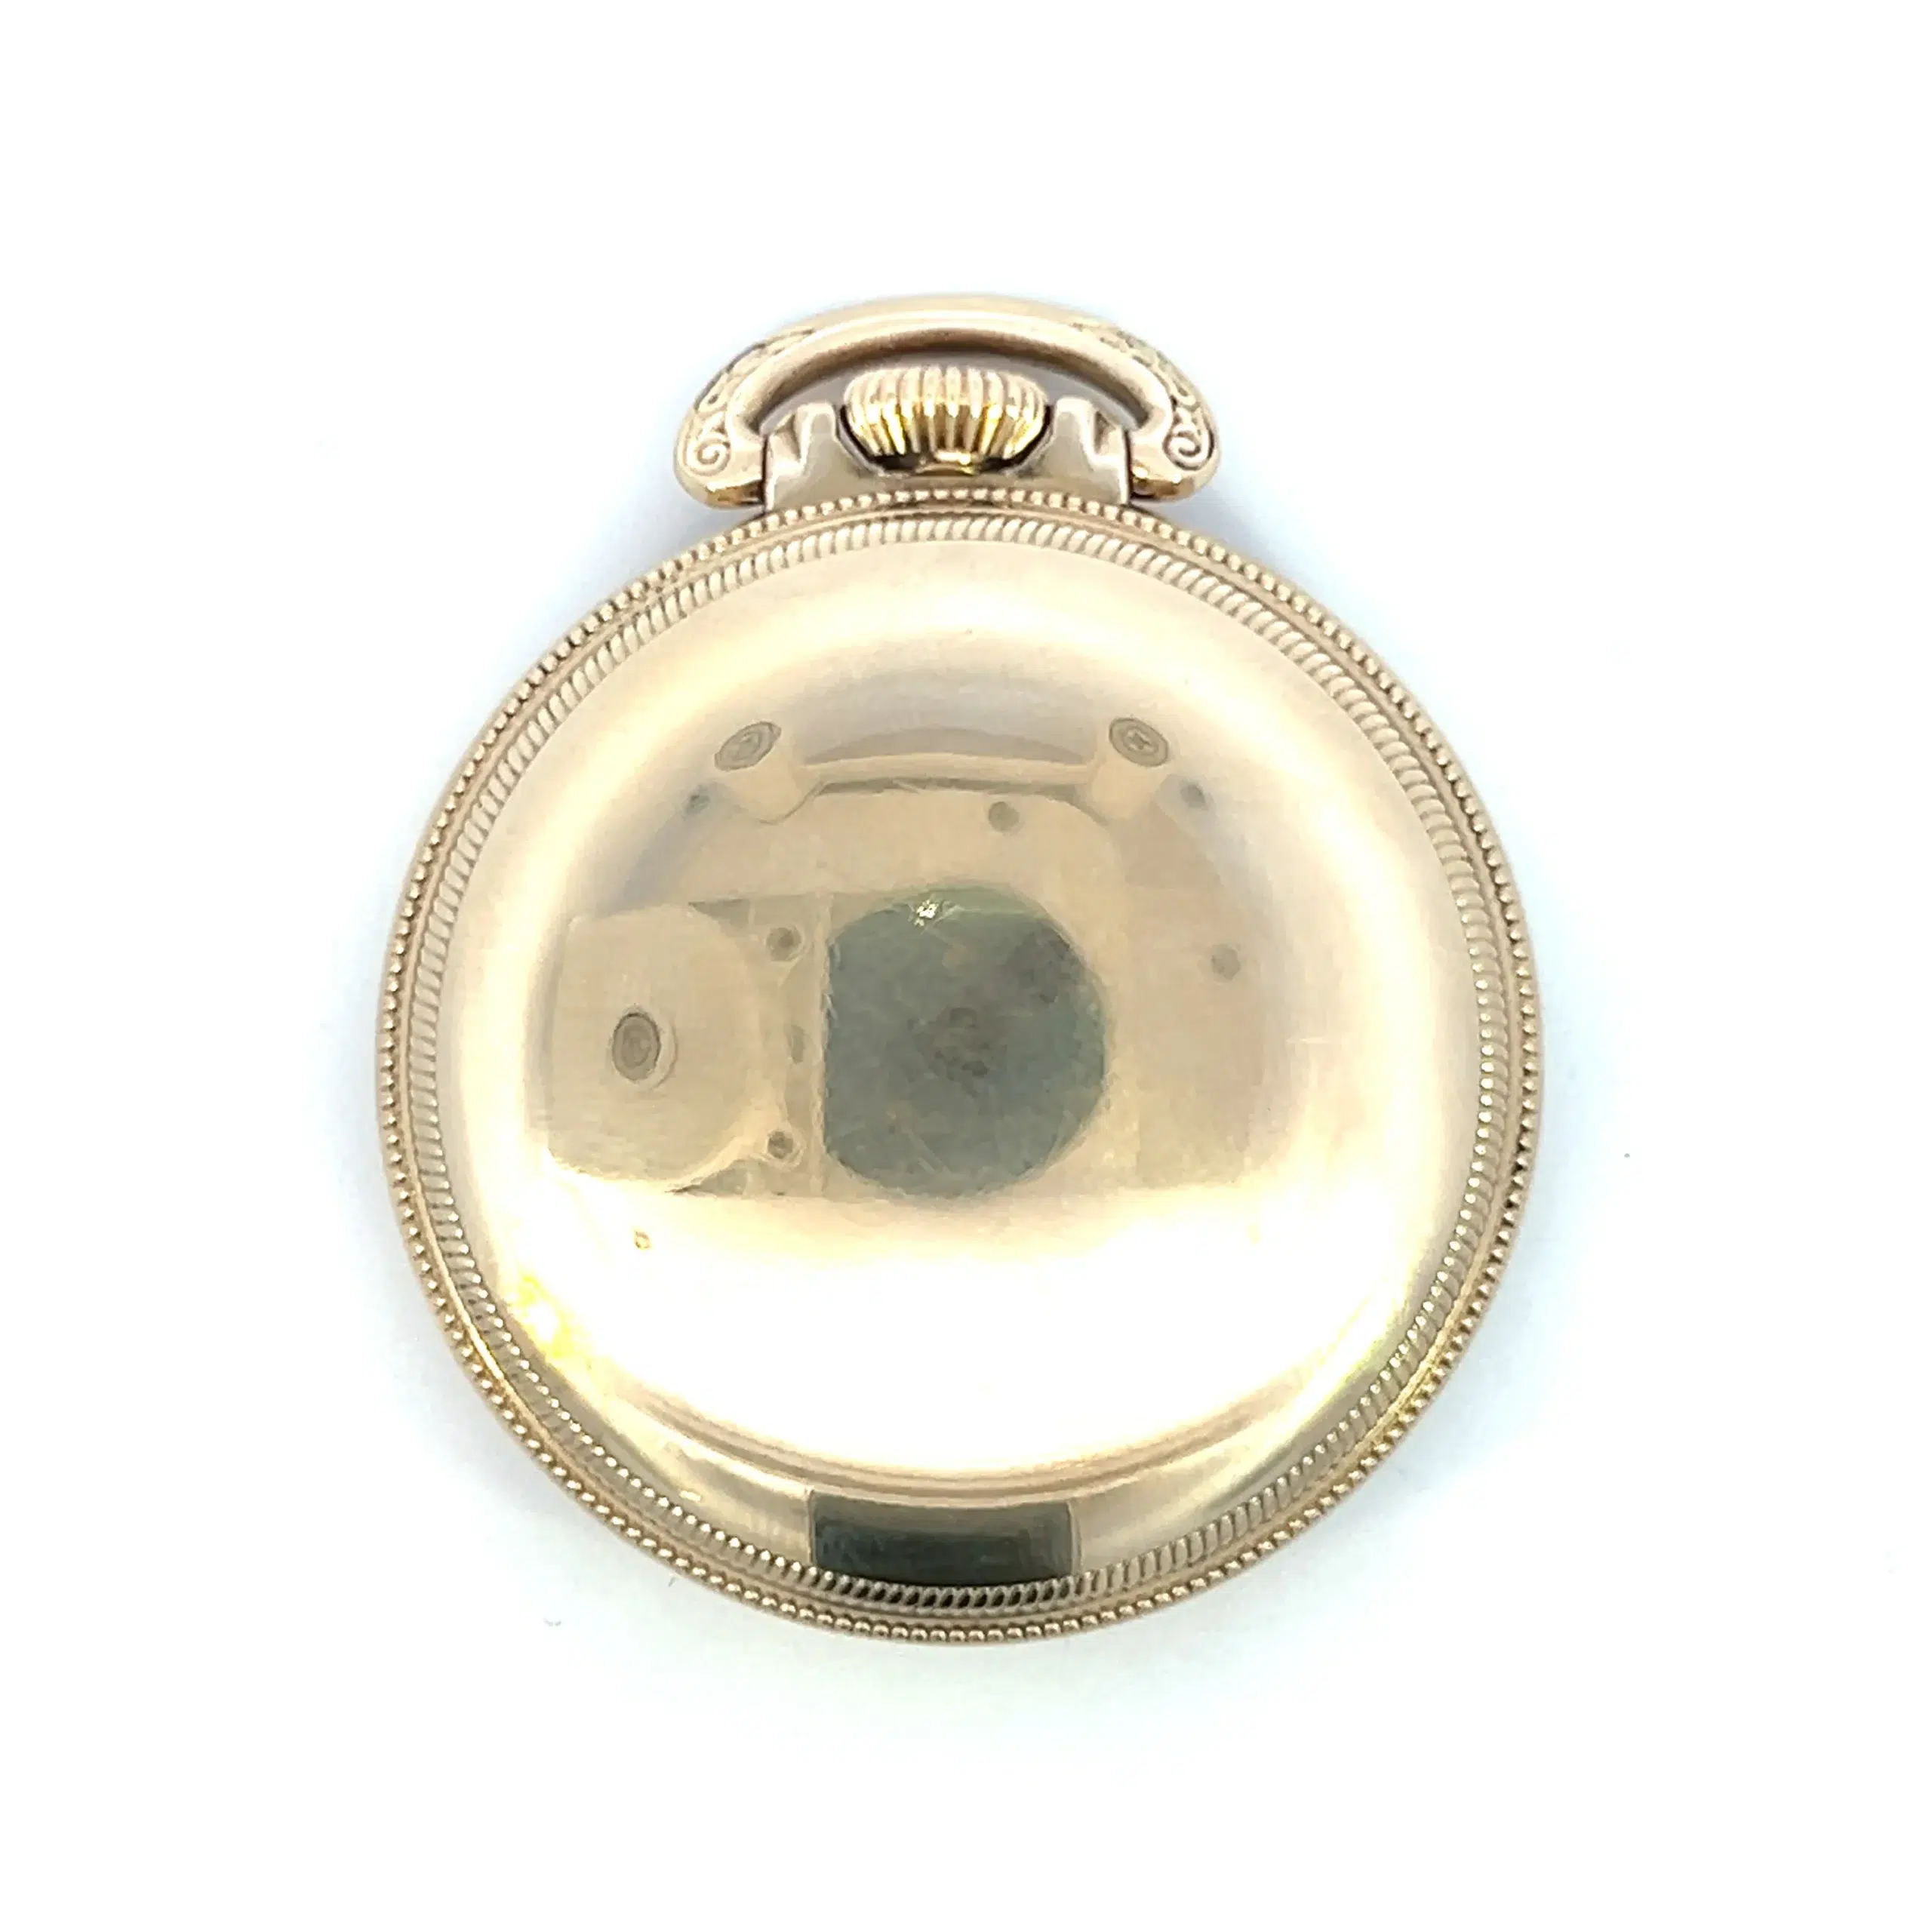 One estate antique Waltham Vanguard Railway Pocket watch featuring a 23 jewel movement, a gold-filled round case with a textured bezel, a white dial, and black Arabic numerals.